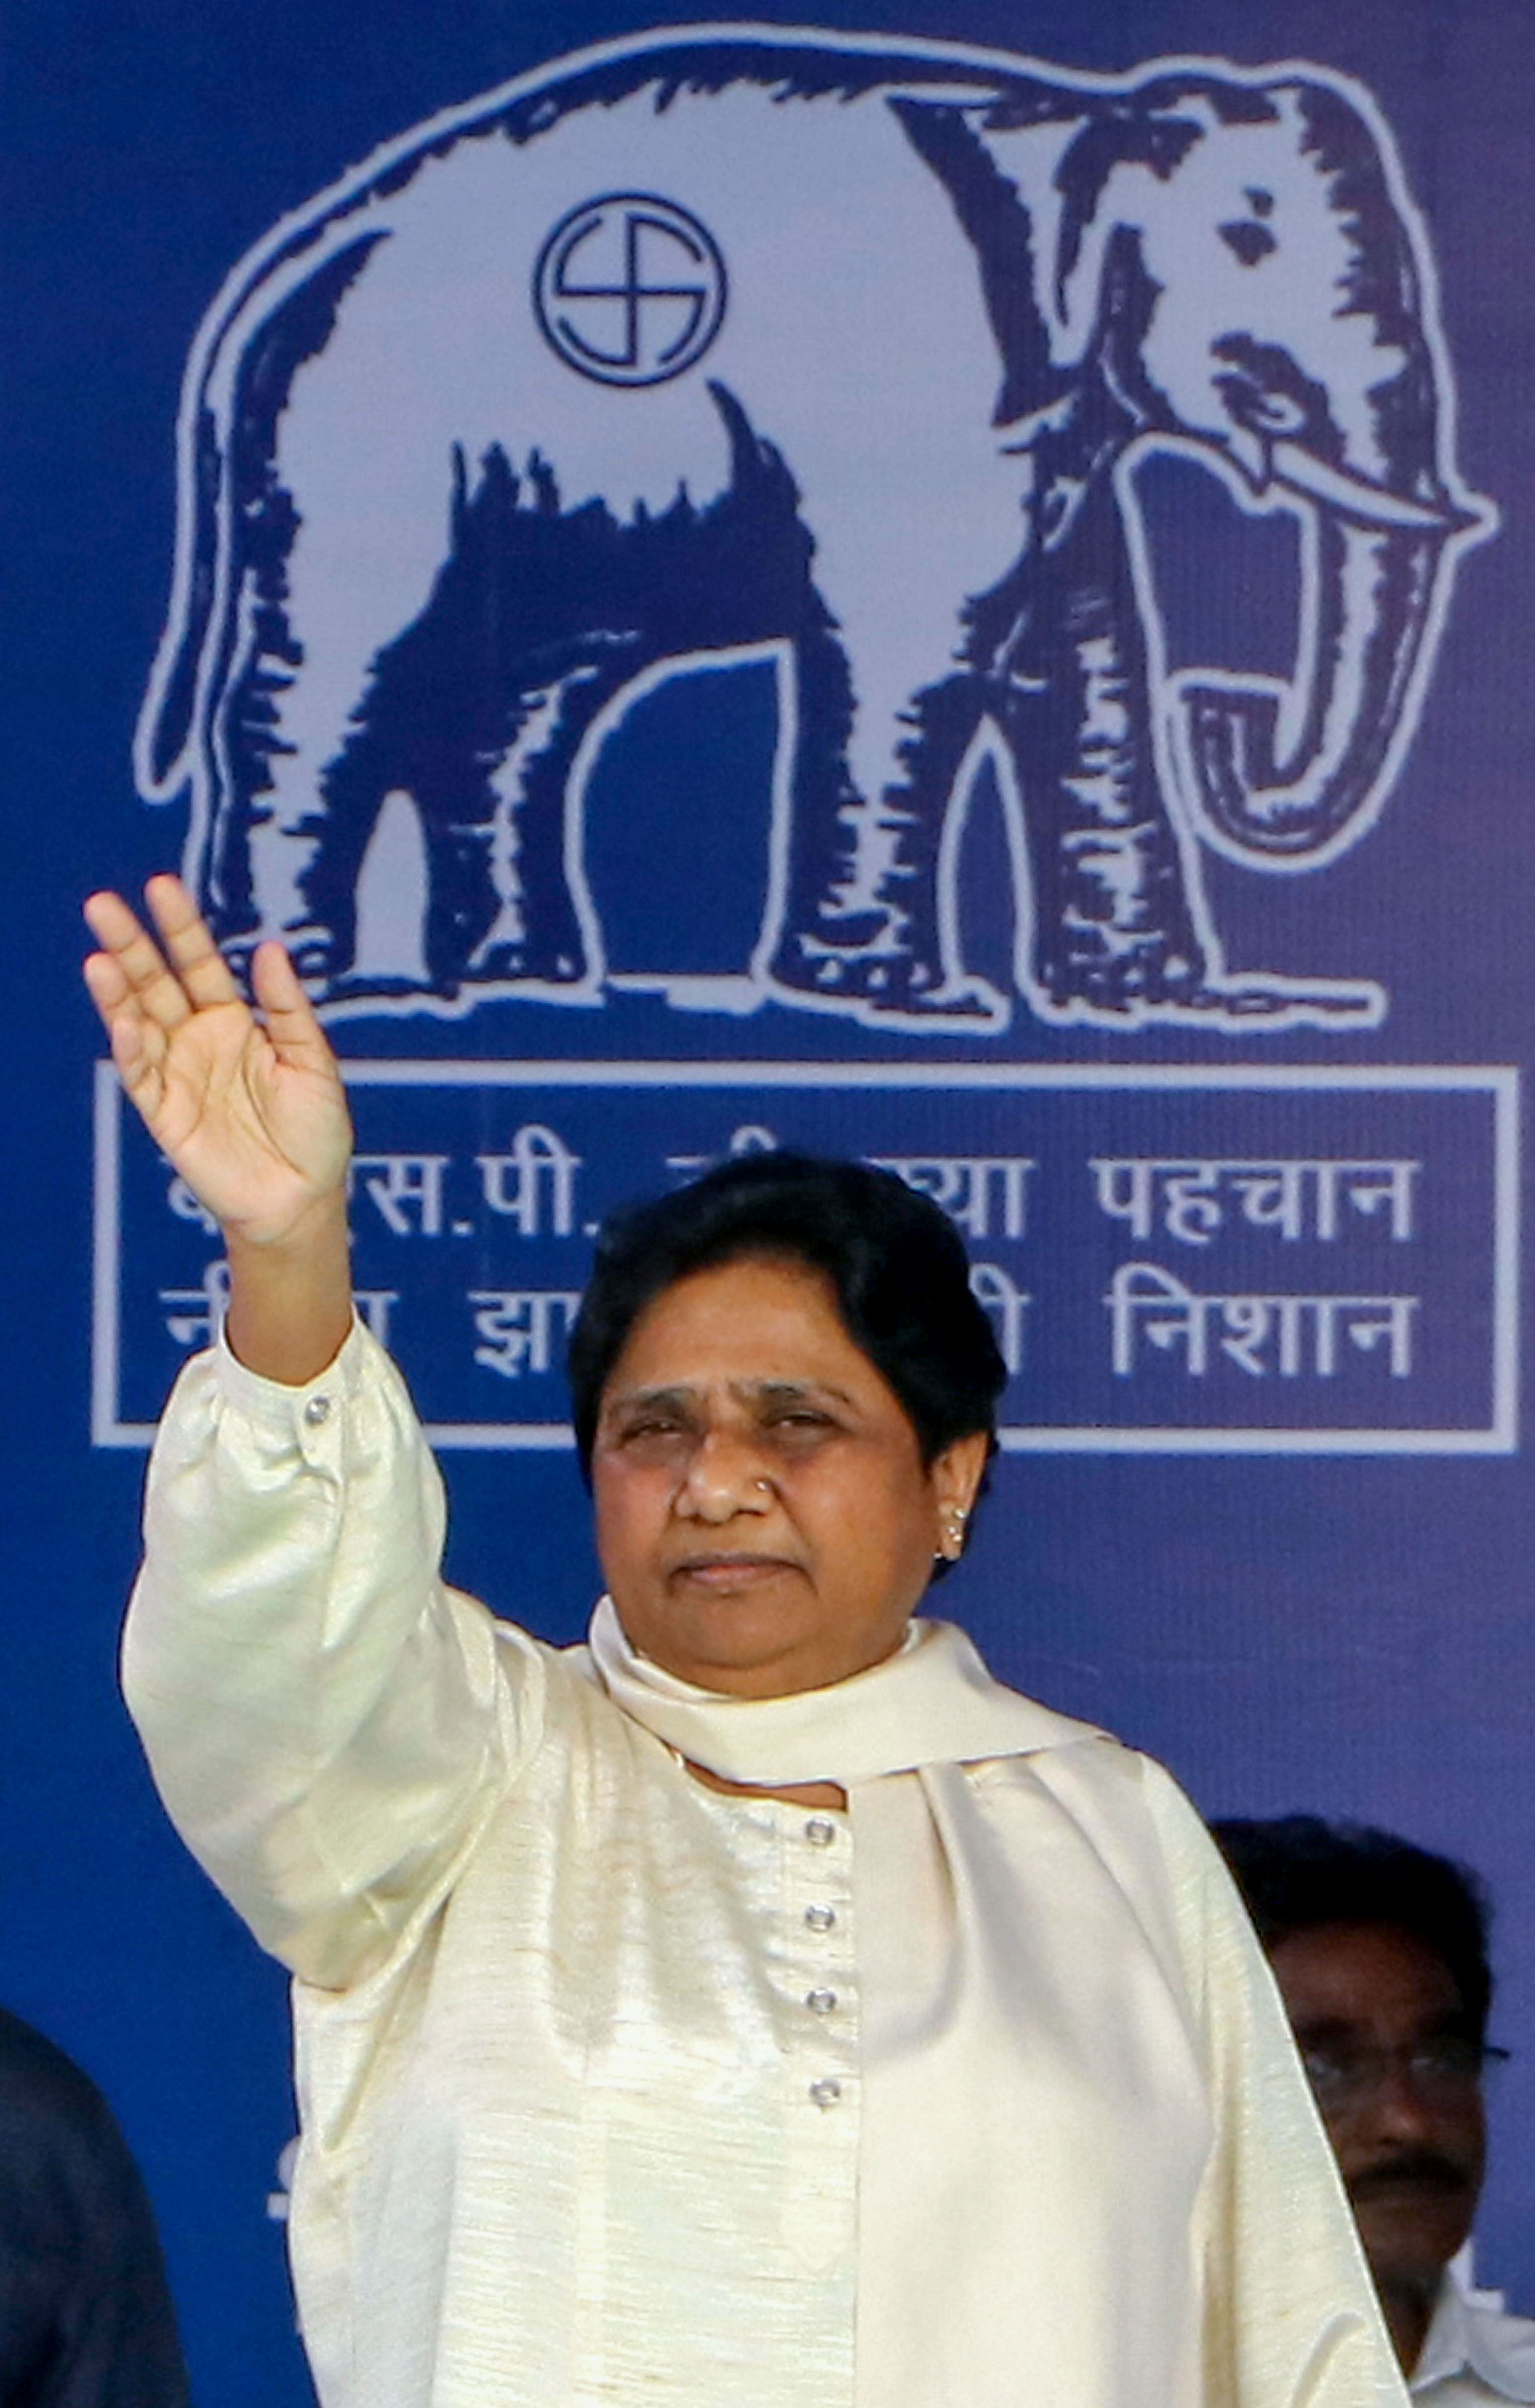 BSP supremo Mayawati waves at party workers at an election campaign rally in support of party candidates ahead of Maharashtra Assembly polls, in Nagpur. (PTI Photo)